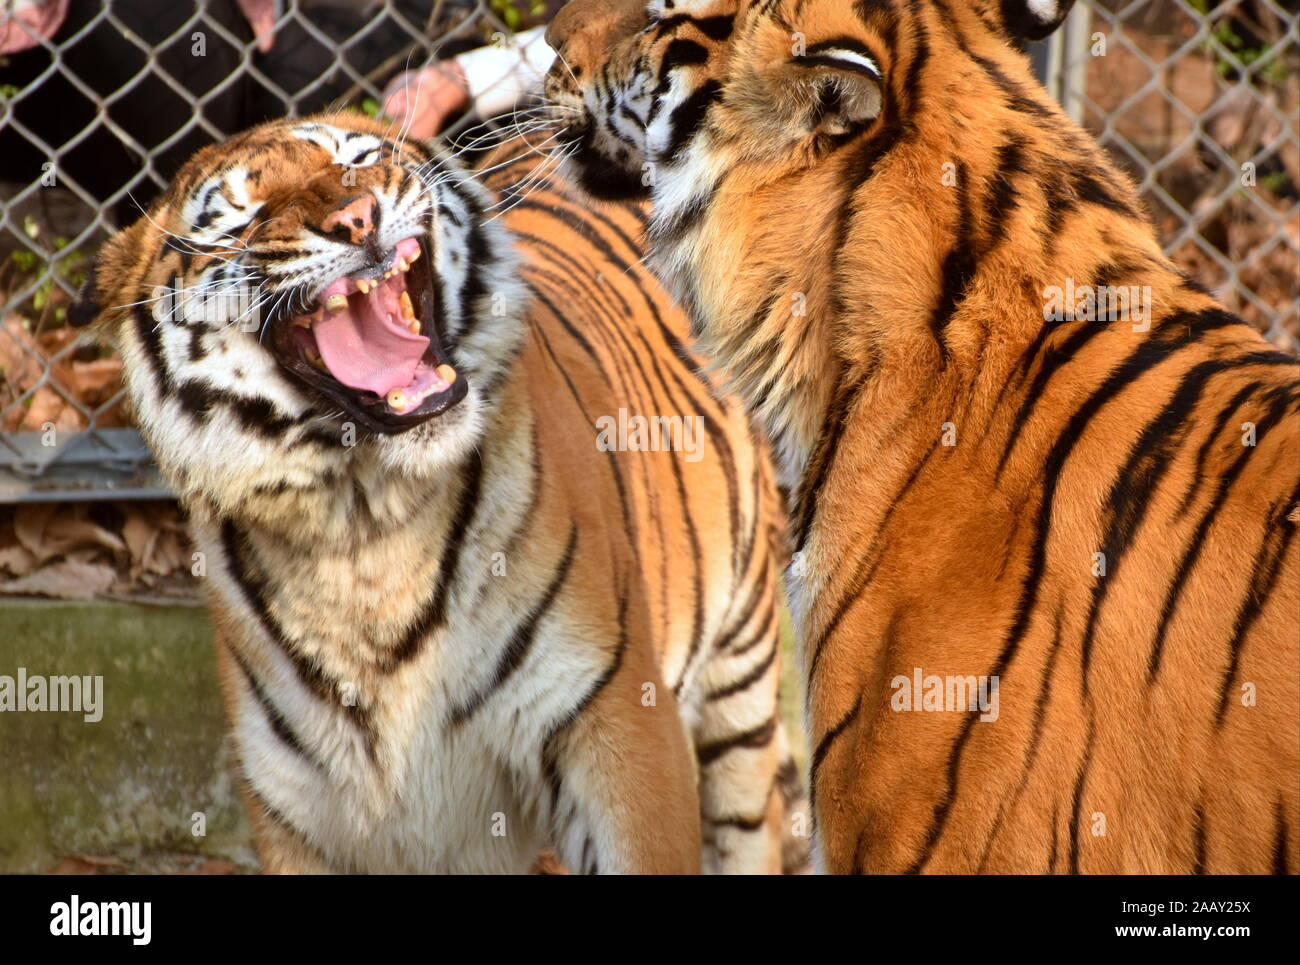 Couple of tigers roaring and quarreling Stock Photo